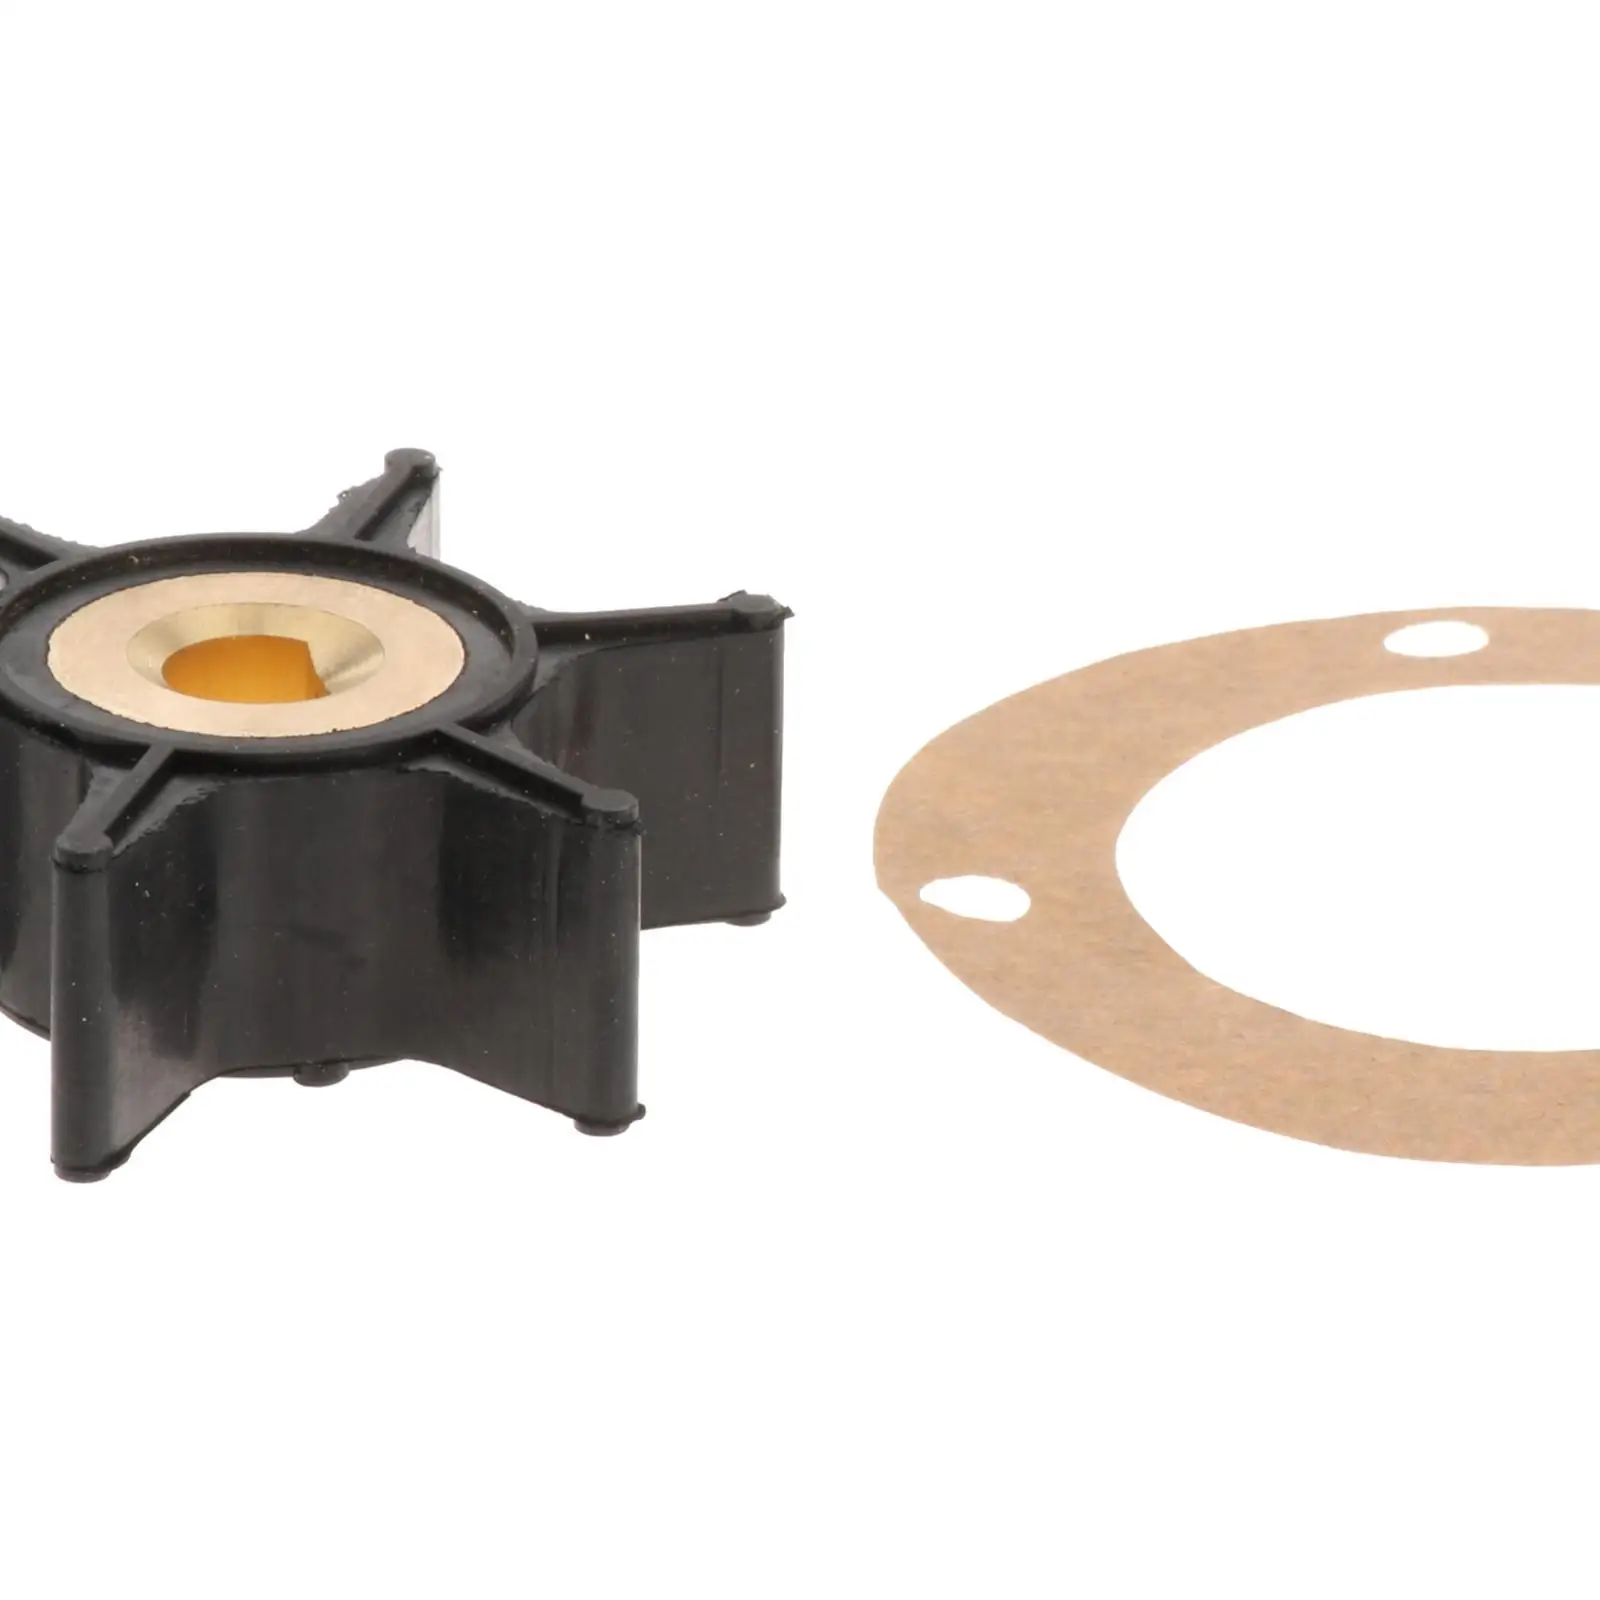 2 Pieces Impeller and 4-Hole Gasket Kit Impeller Kit Fit for Onan 131-0386 170-3172